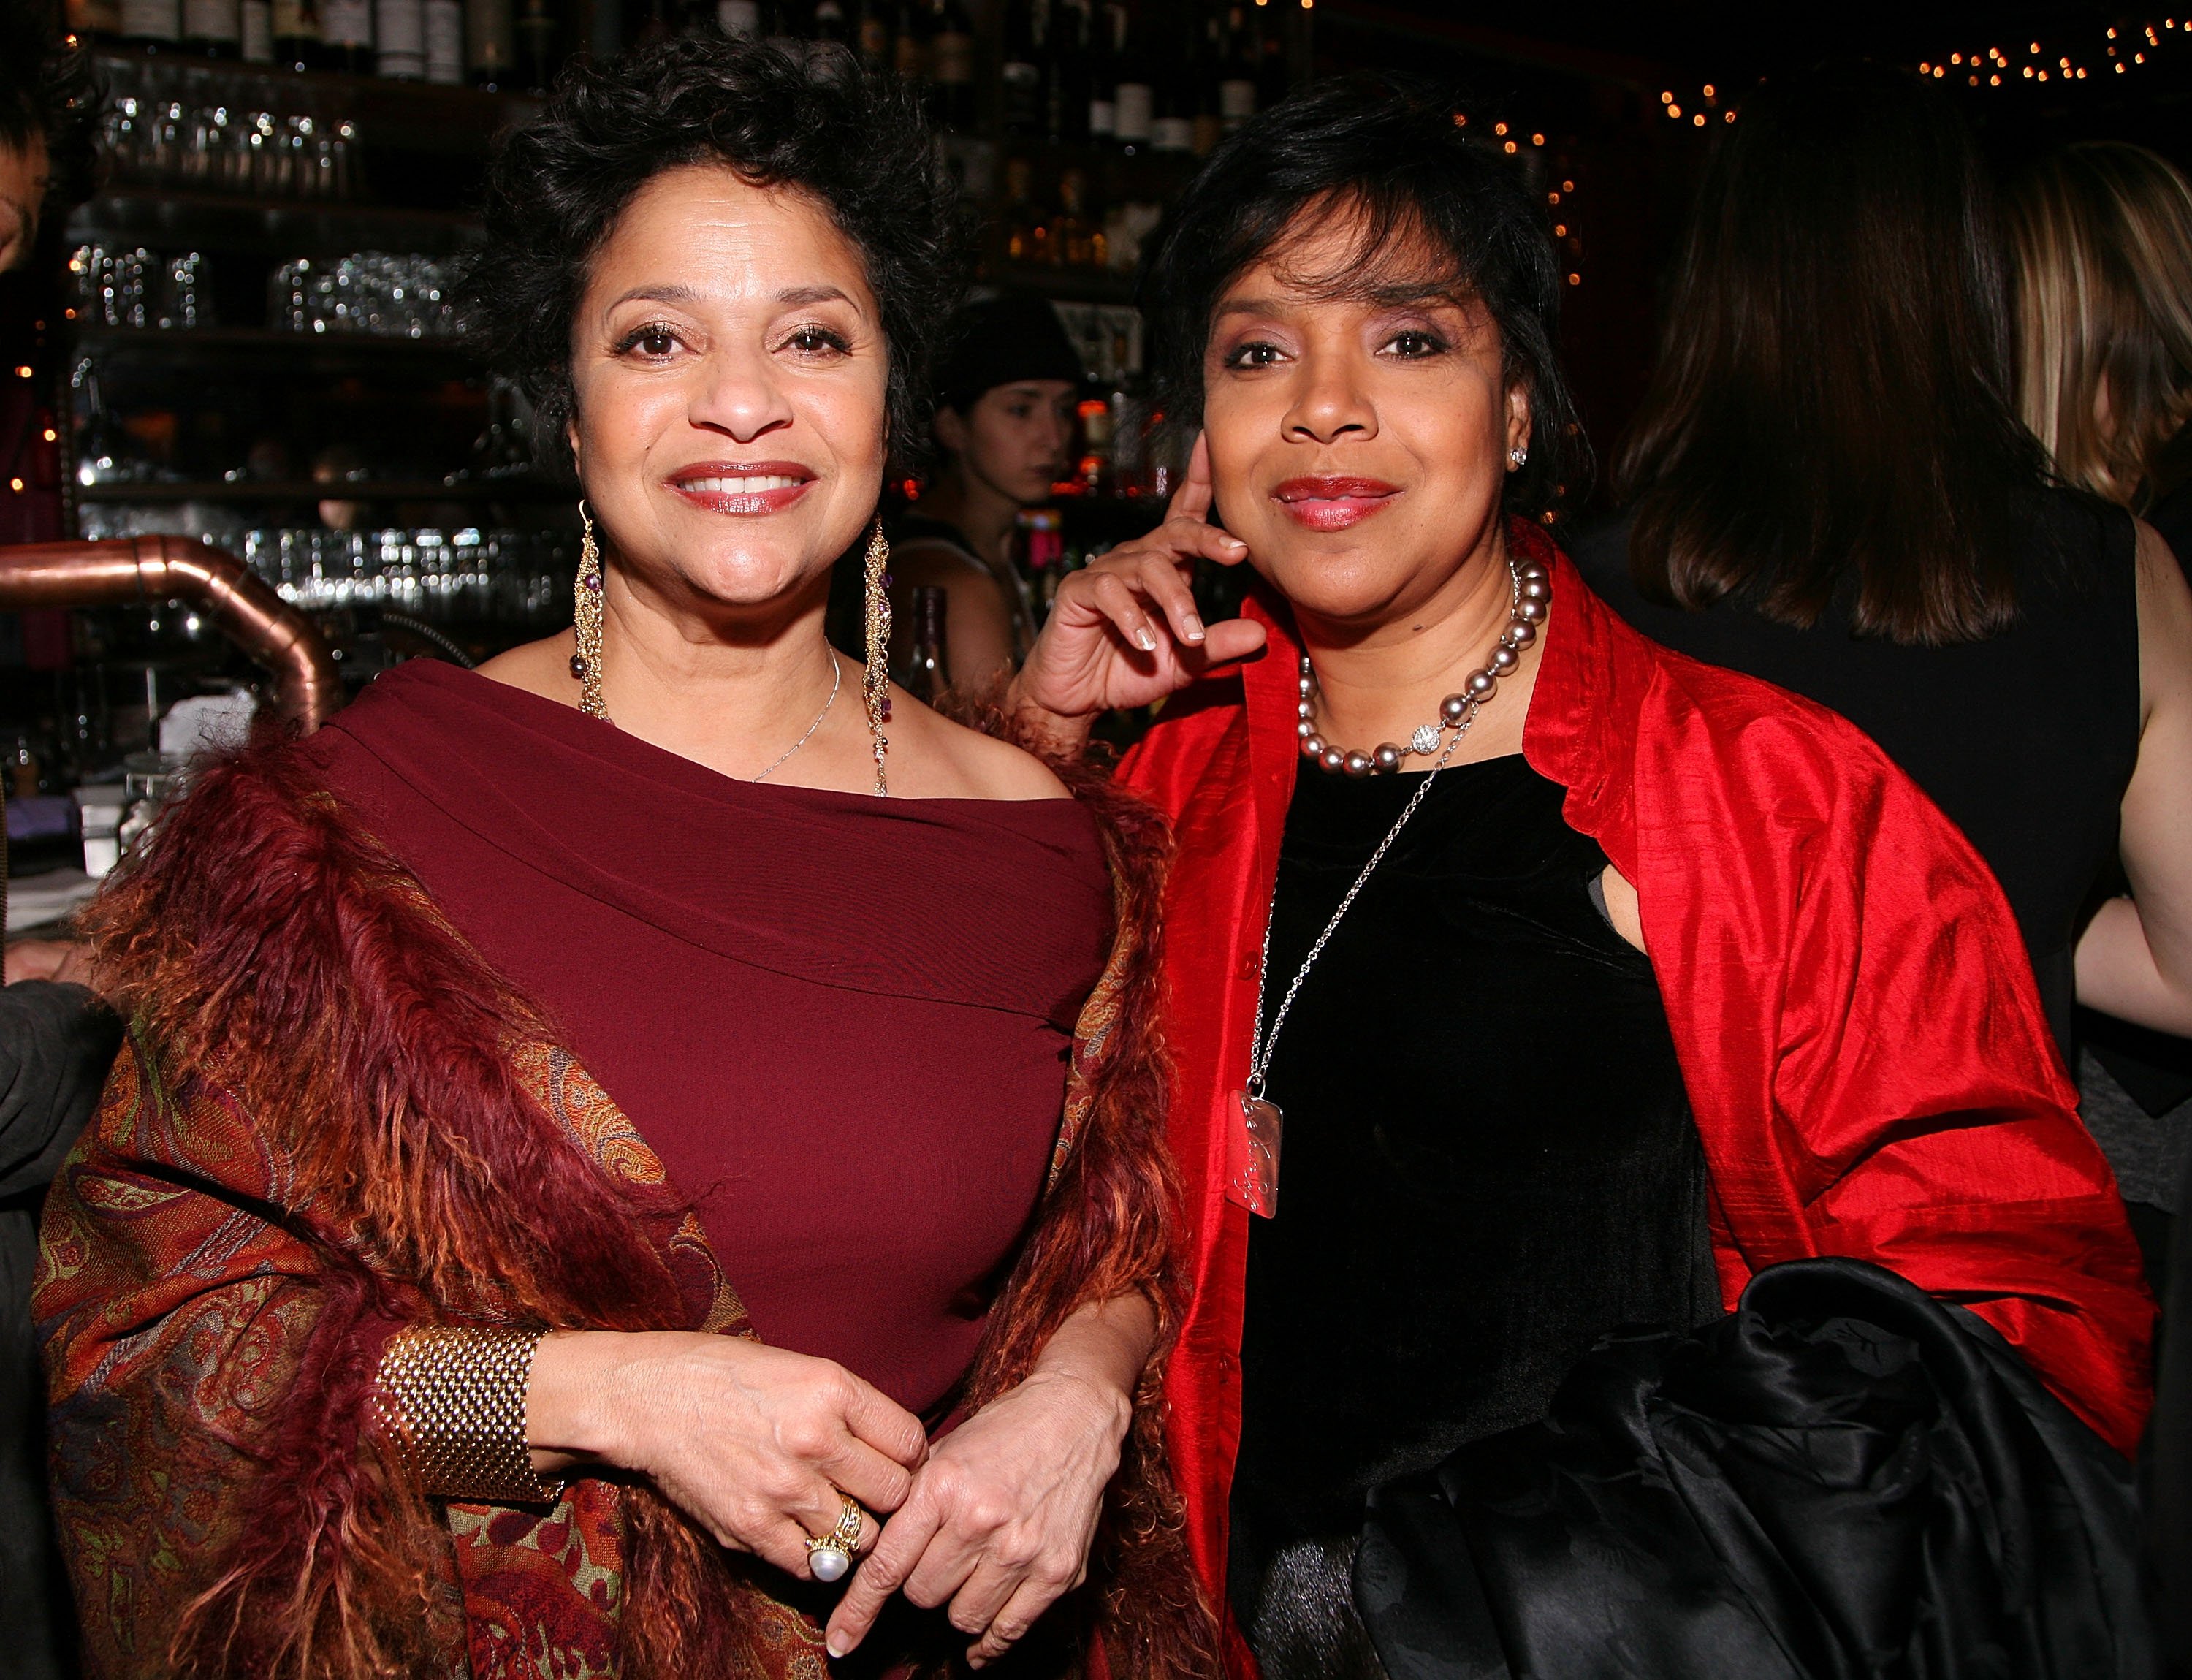  Debbie Allen and Phylicia Rashad at the New York Magazine Oscar Viewing Party on February 24, 2008 in New York City. | Source: Getty Images